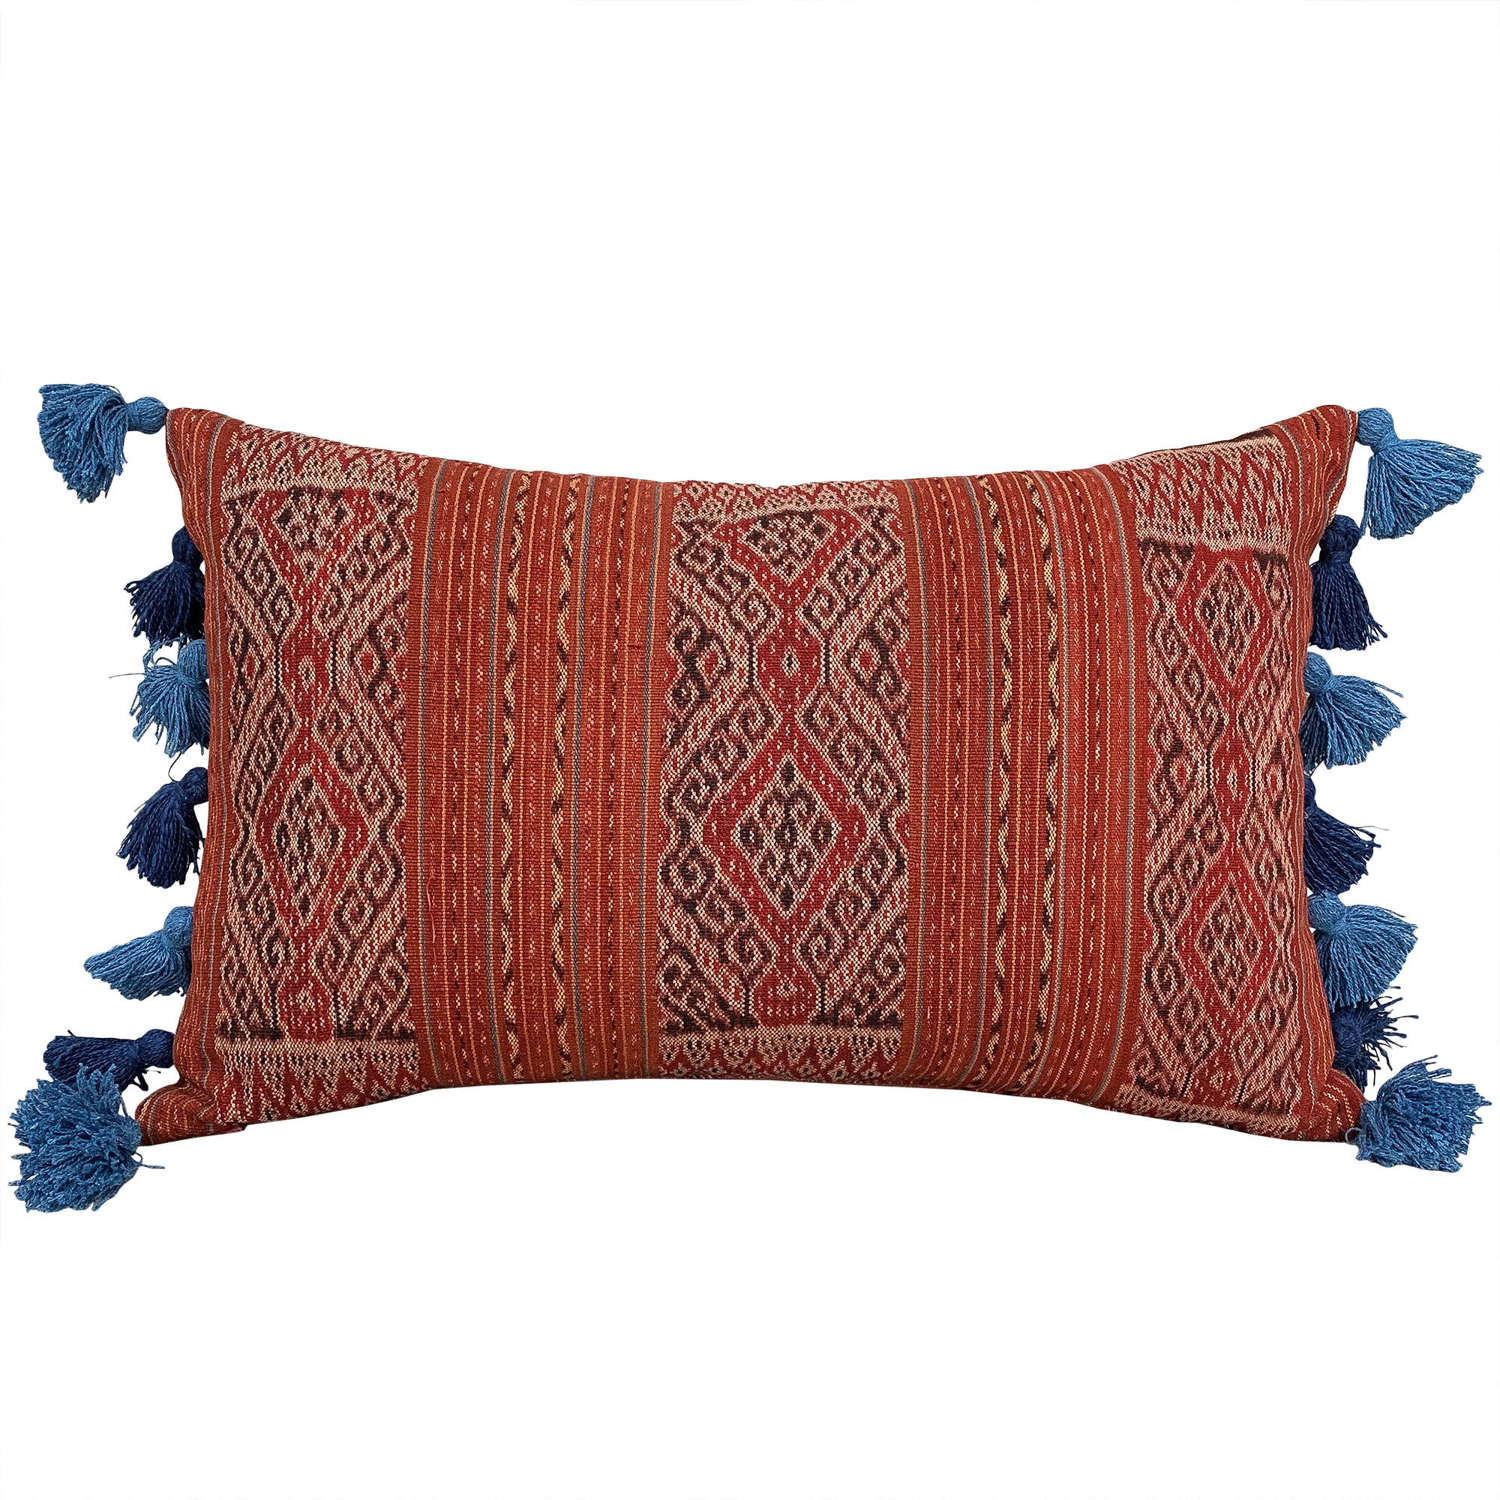 Timor ikat cushions with tasselled sides